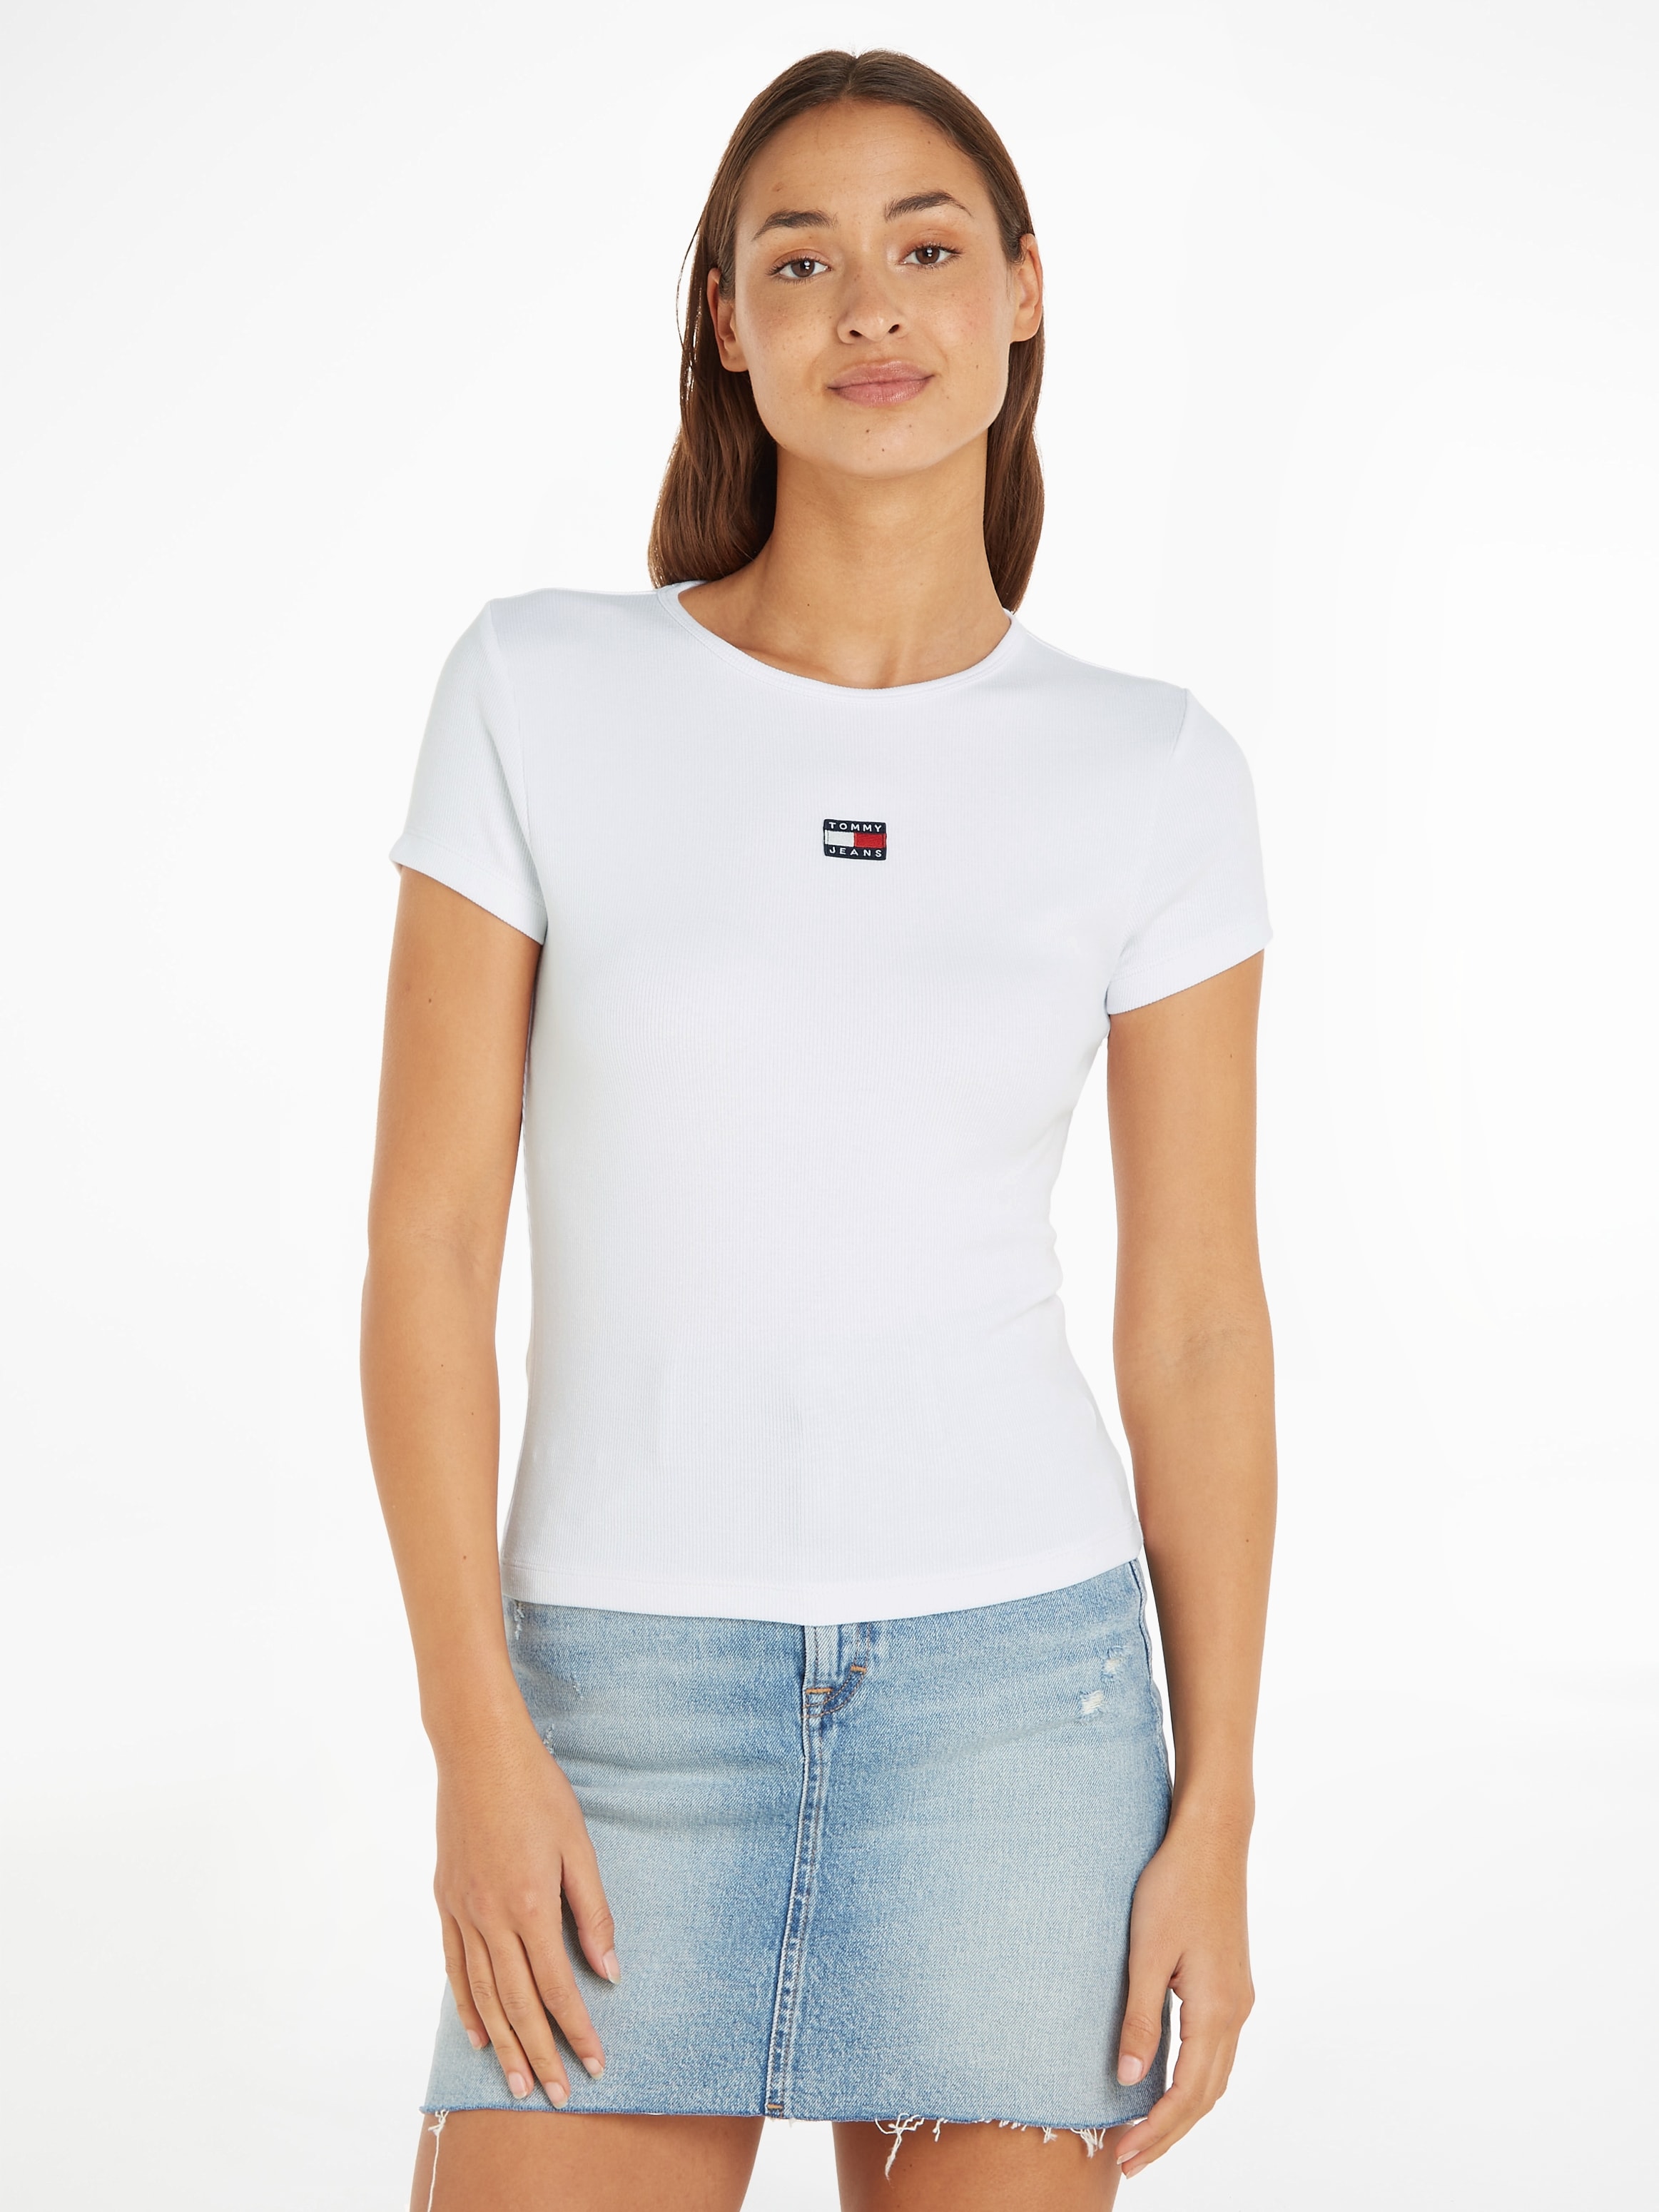 Tommy Jeans T-Shirt Logobadge ♕ bei BBY TEE«, RIB mit XS BADGE »TJW